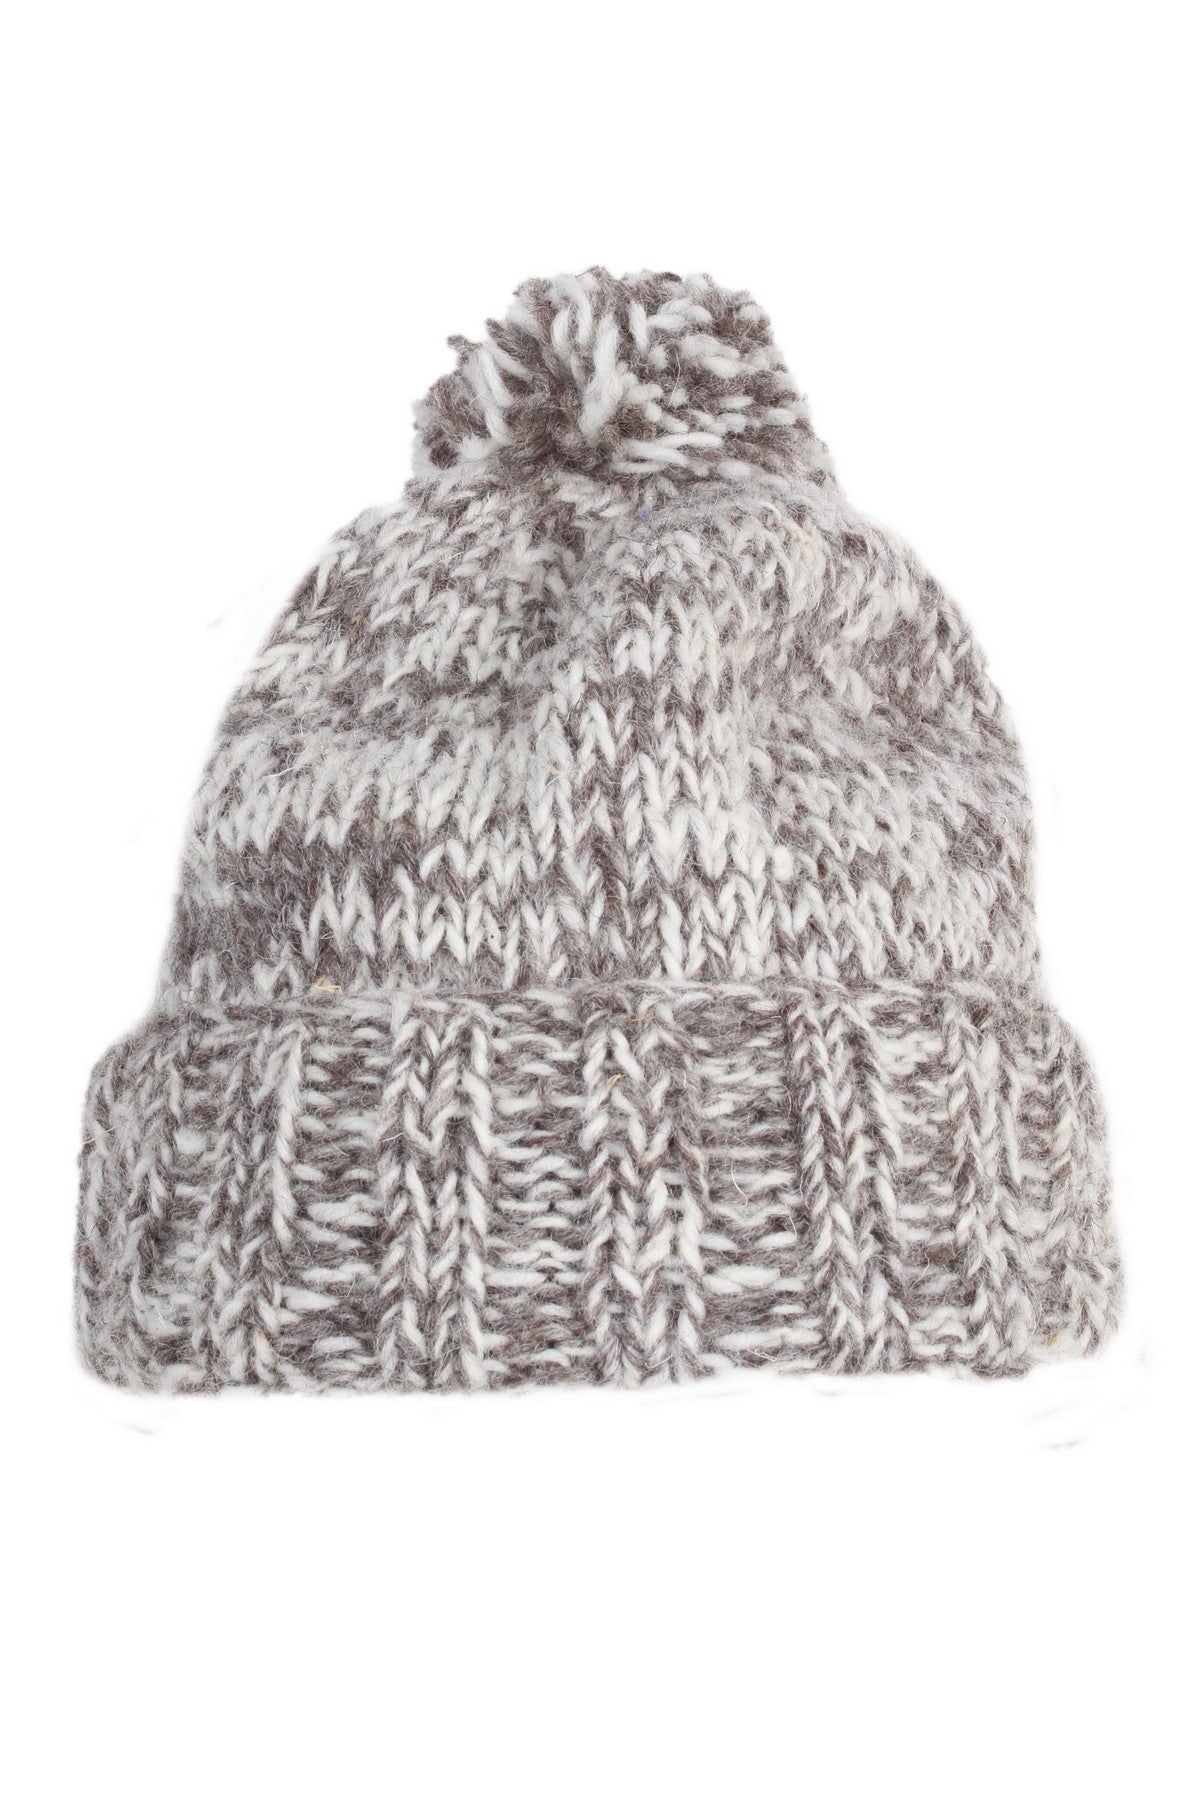 Donegal Bobble Hat - Grey